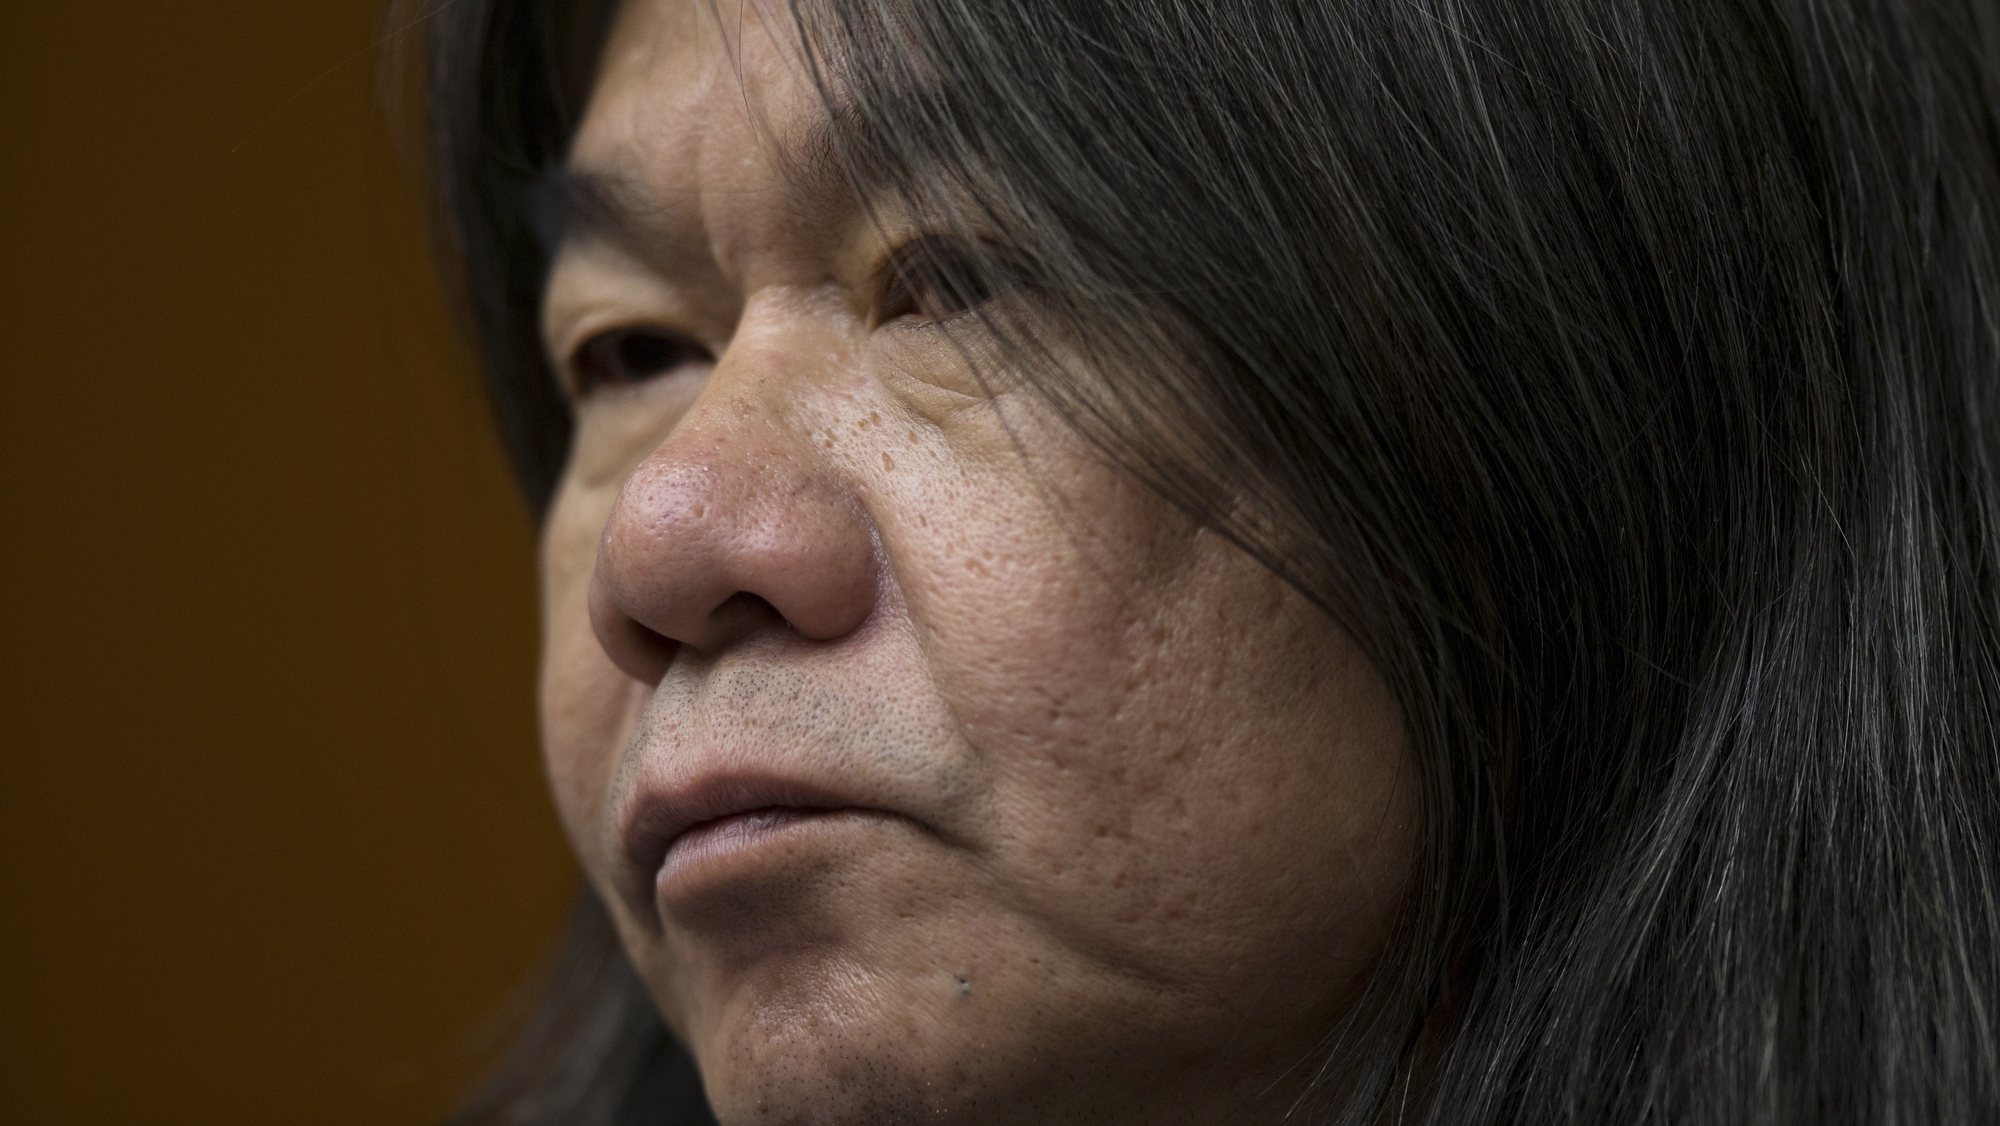 epa09439984 (FILE) - Leung Kwok-hung, also known as Long Hair, a pro-democracy lawmaker and founder of the League of Social Democrats, speaks during a press conference at the Legislative Council in Hong Kong, China, 08 February 2017 (reissued 01 September 2021). Seven prominent pro-democracy activists, Leung Kwok-hung, were sentenced on 01 September to up to 16 months in jail for their role in an unauthorized assembly in October 2019.  EPA/JEROME FAVRE *** Local Caption *** 56524242